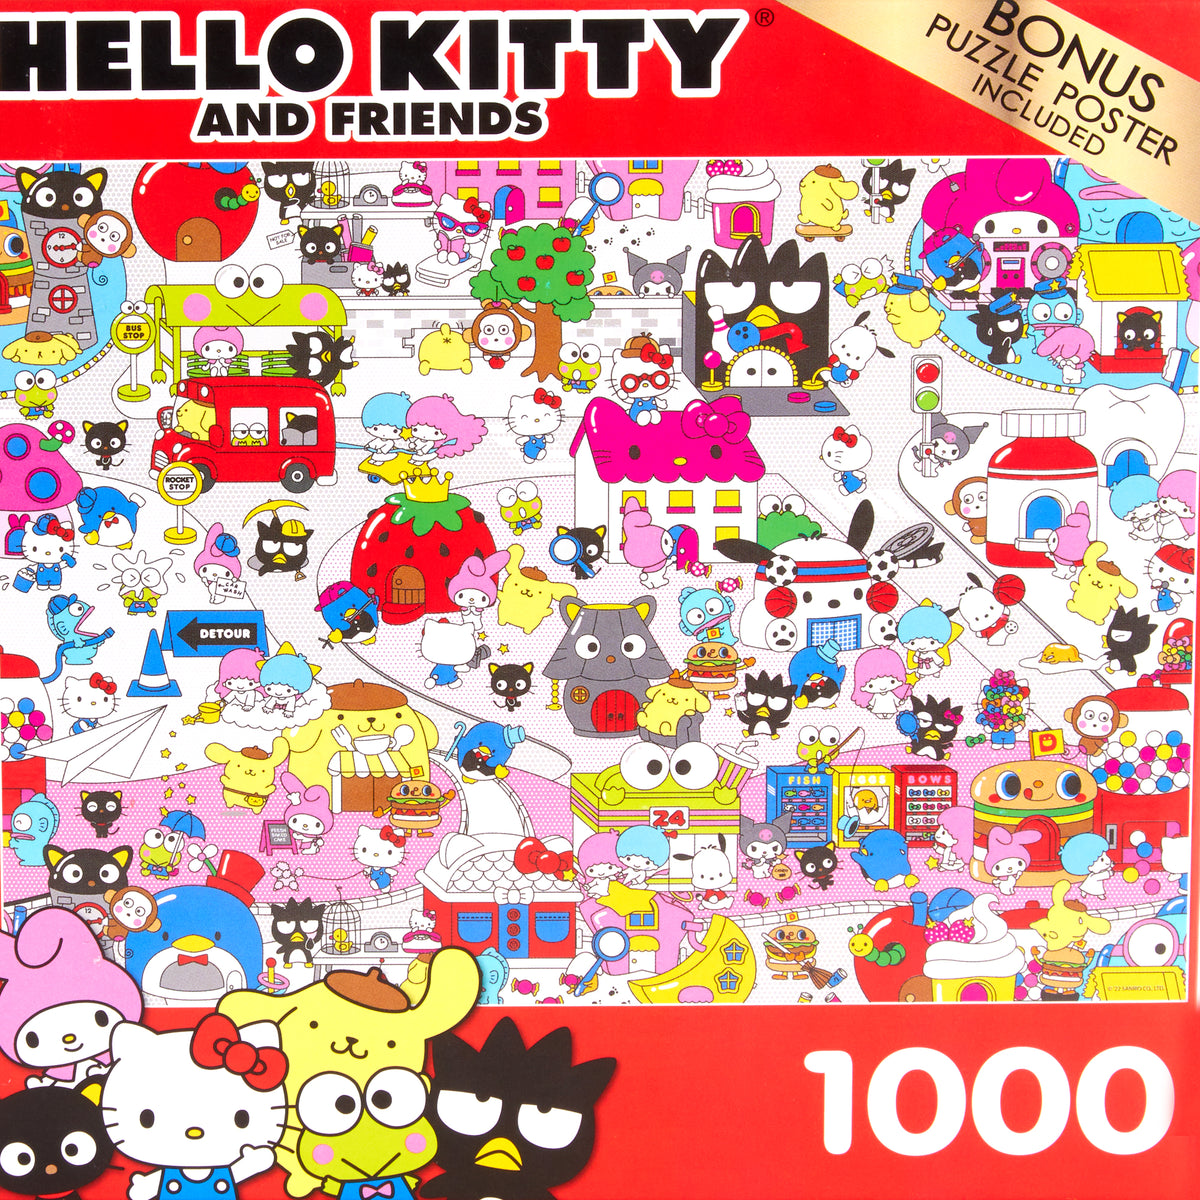 Hello Kitty® and Friends Tropical Times 1,000 Piece Puzzle – The Op Games